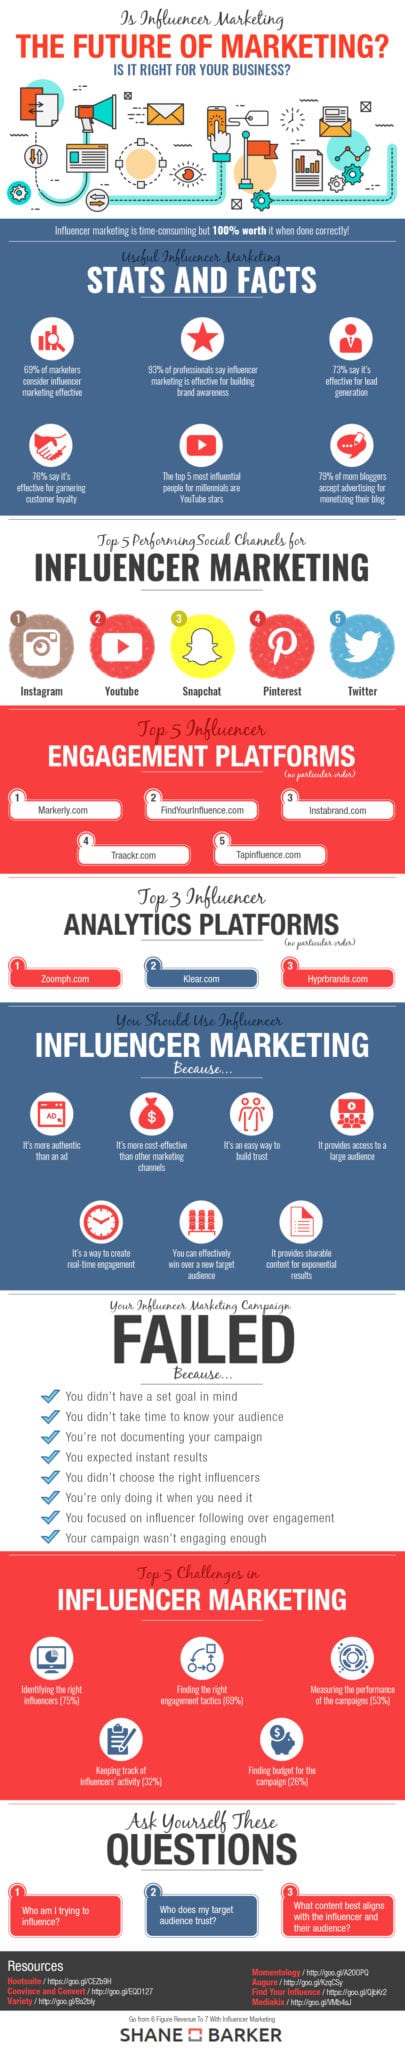 Is Influencer Marketing the Future of Marketing?  Infographic